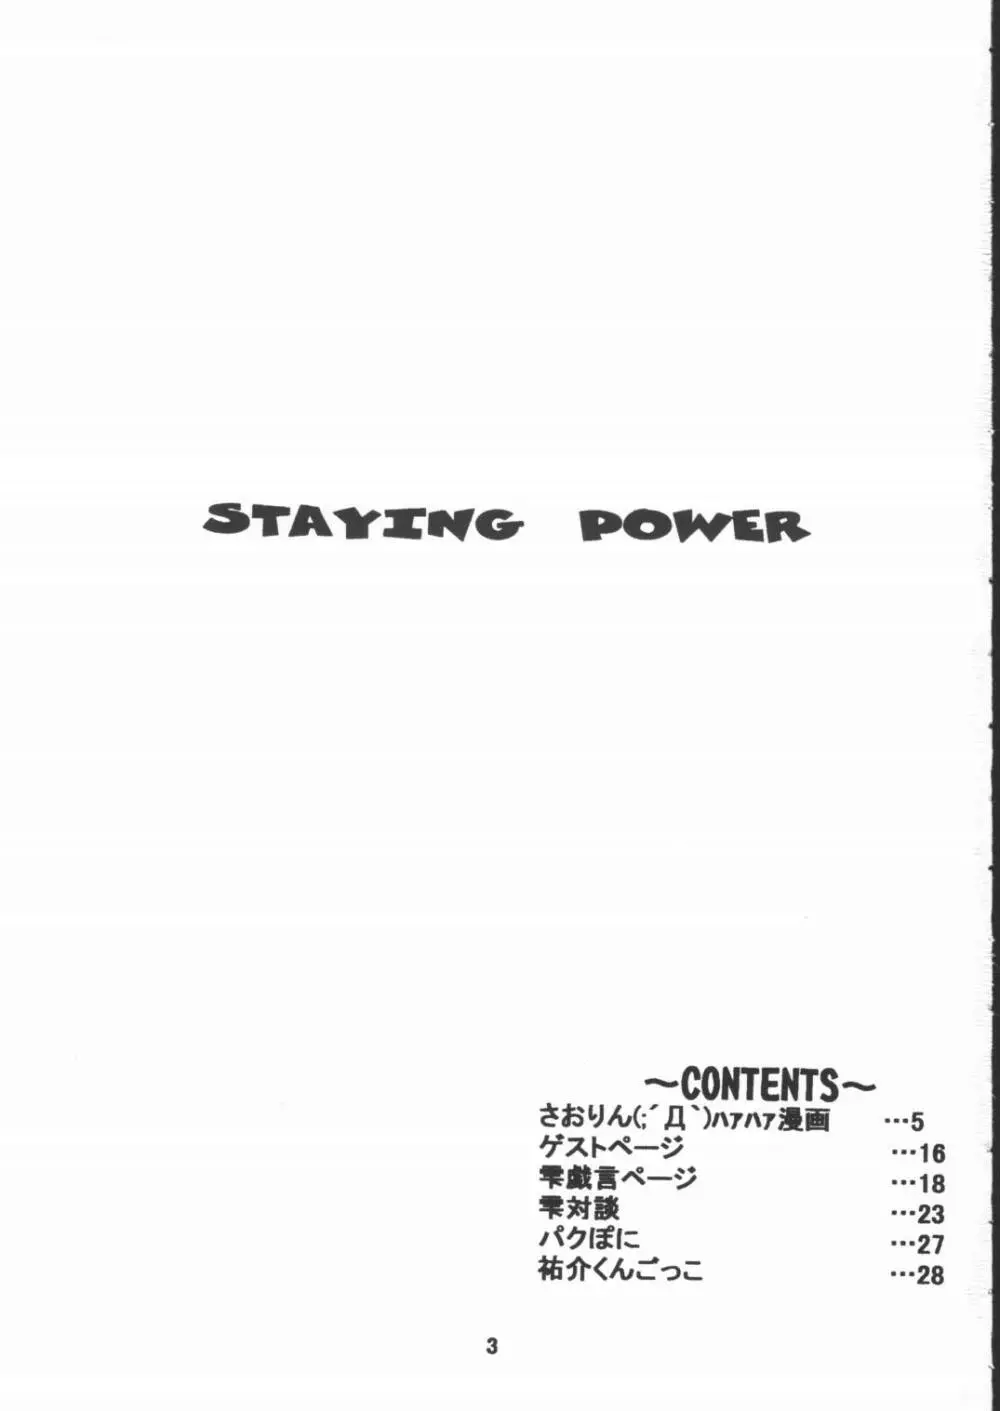 STAYING POWER Page.2